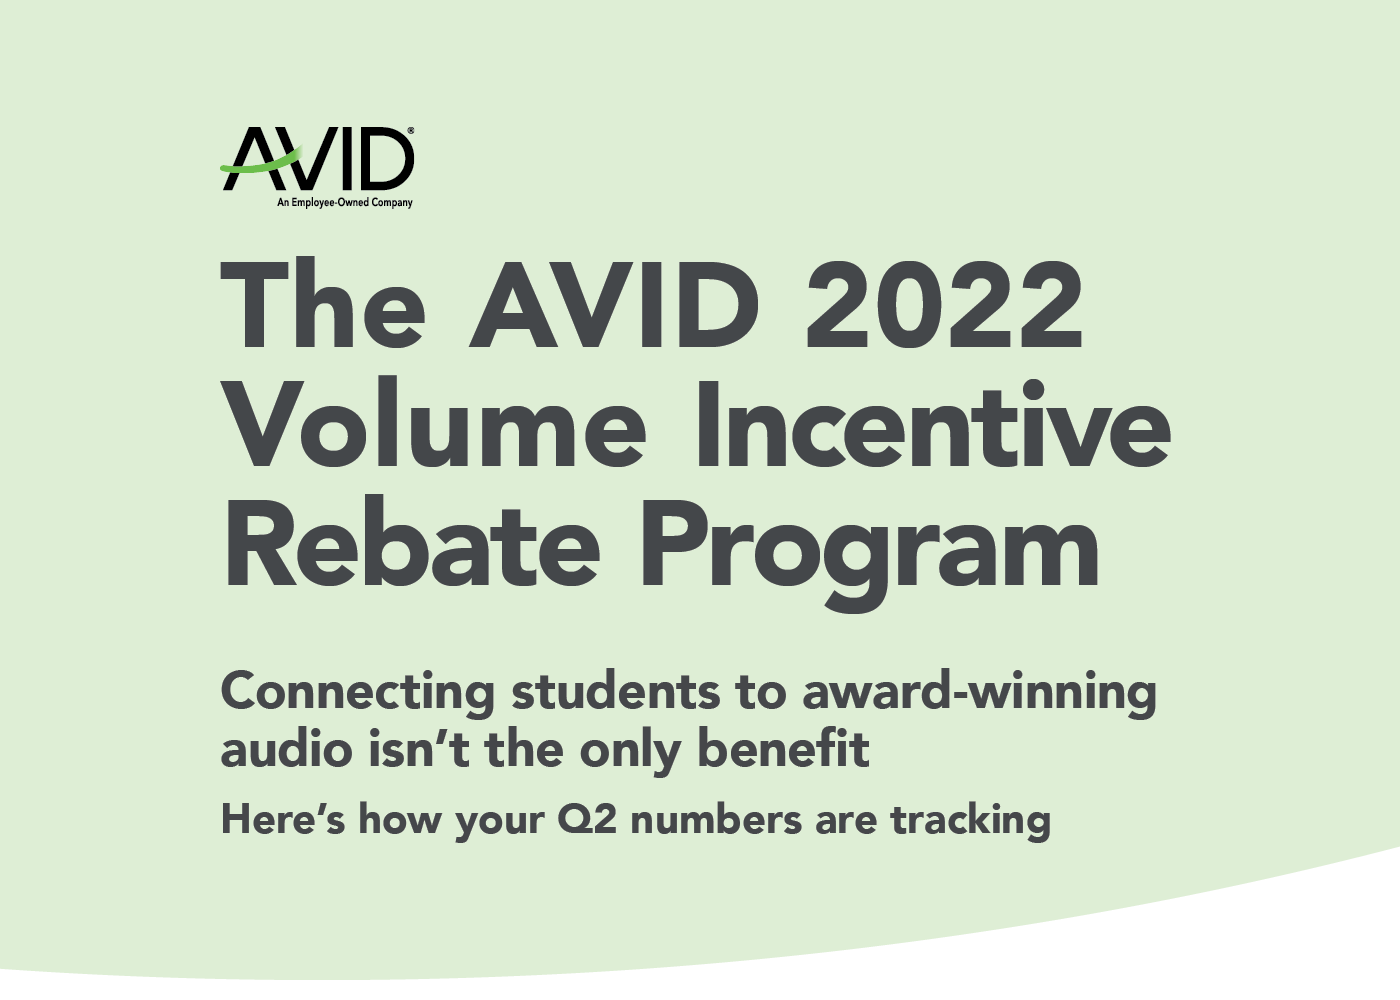 The AVID 2022 Volume Incentive Rebate Program: Here's how your Q2 numbers are tracking.